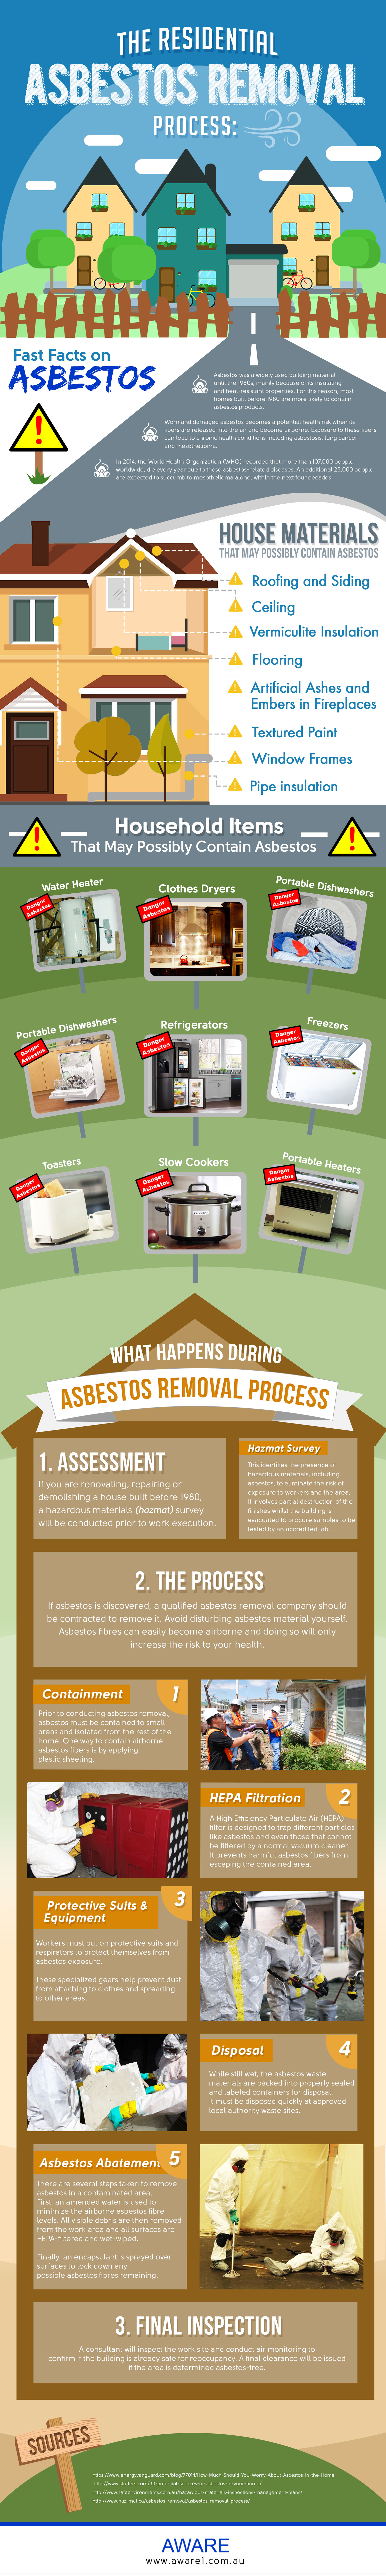 Residential Asbestos Removal Process